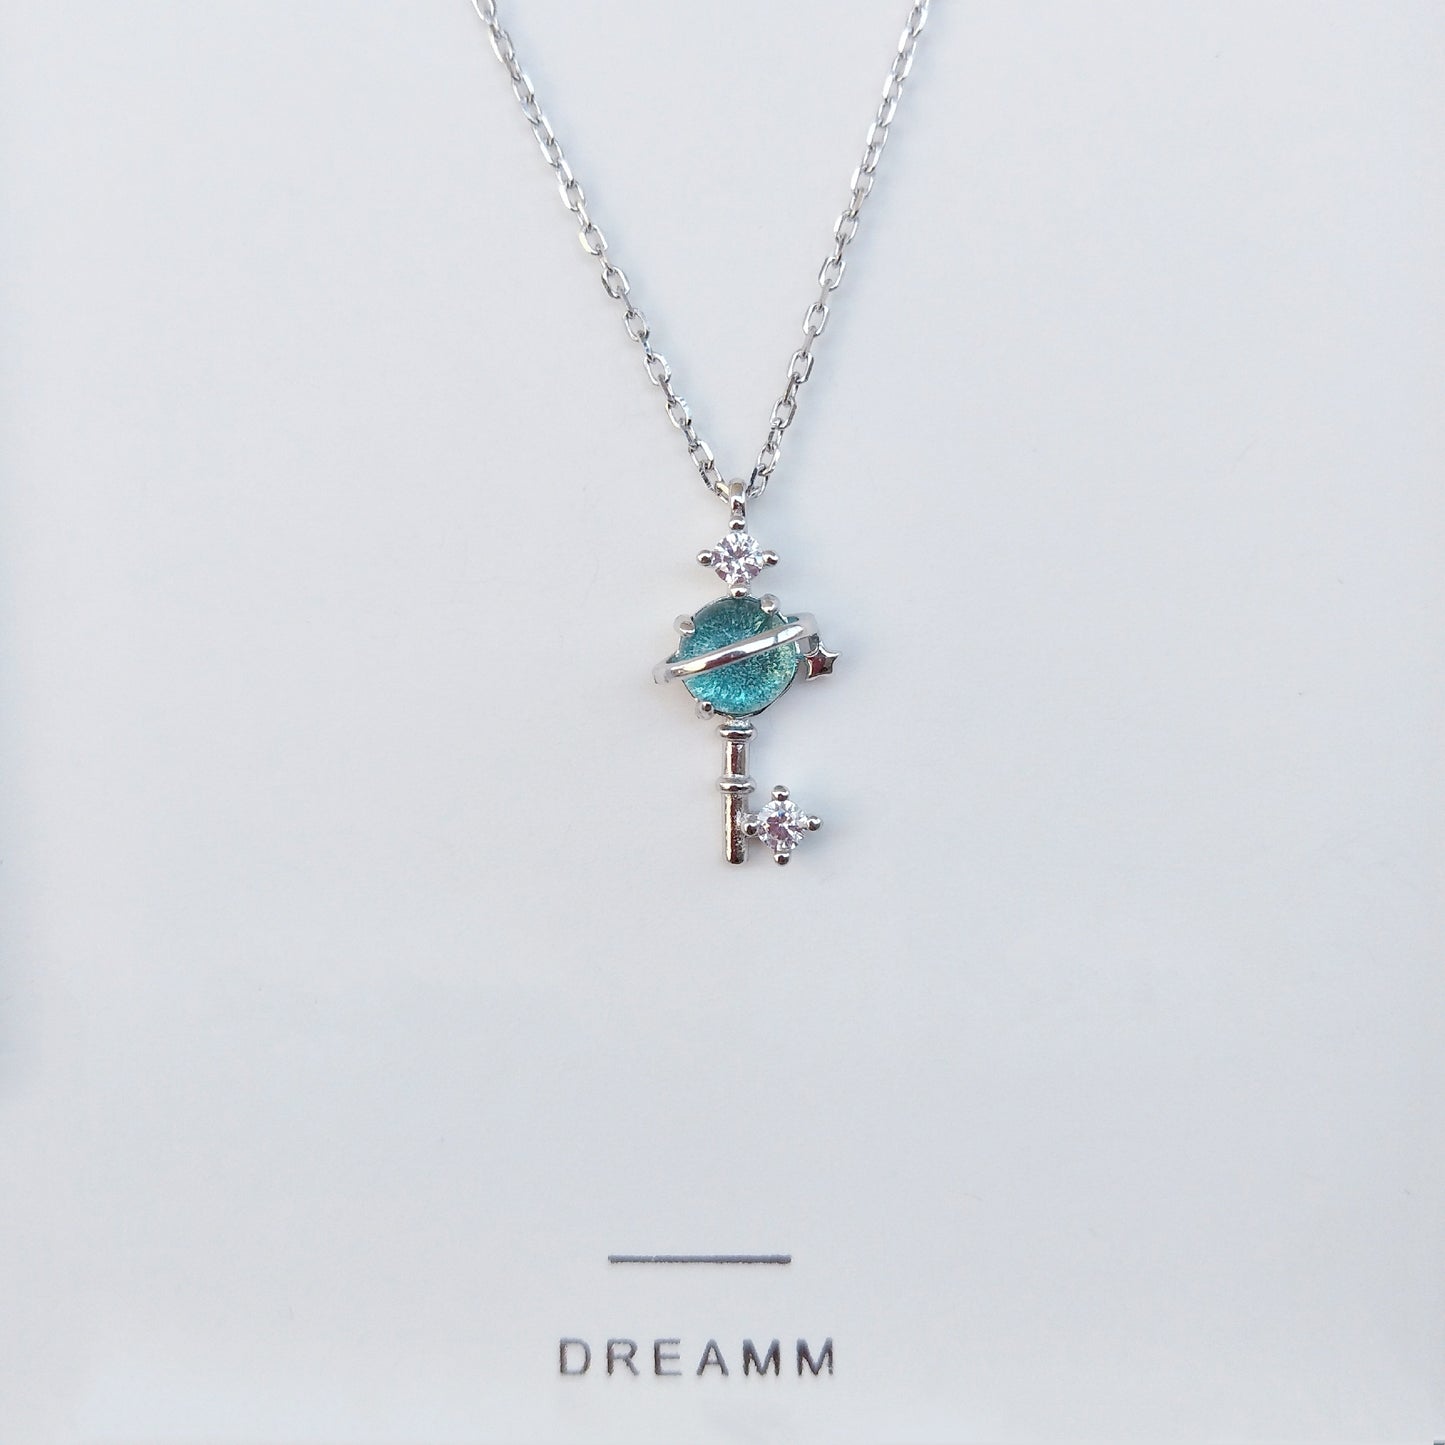 Key Necklace in Sliver (Blue Stone)